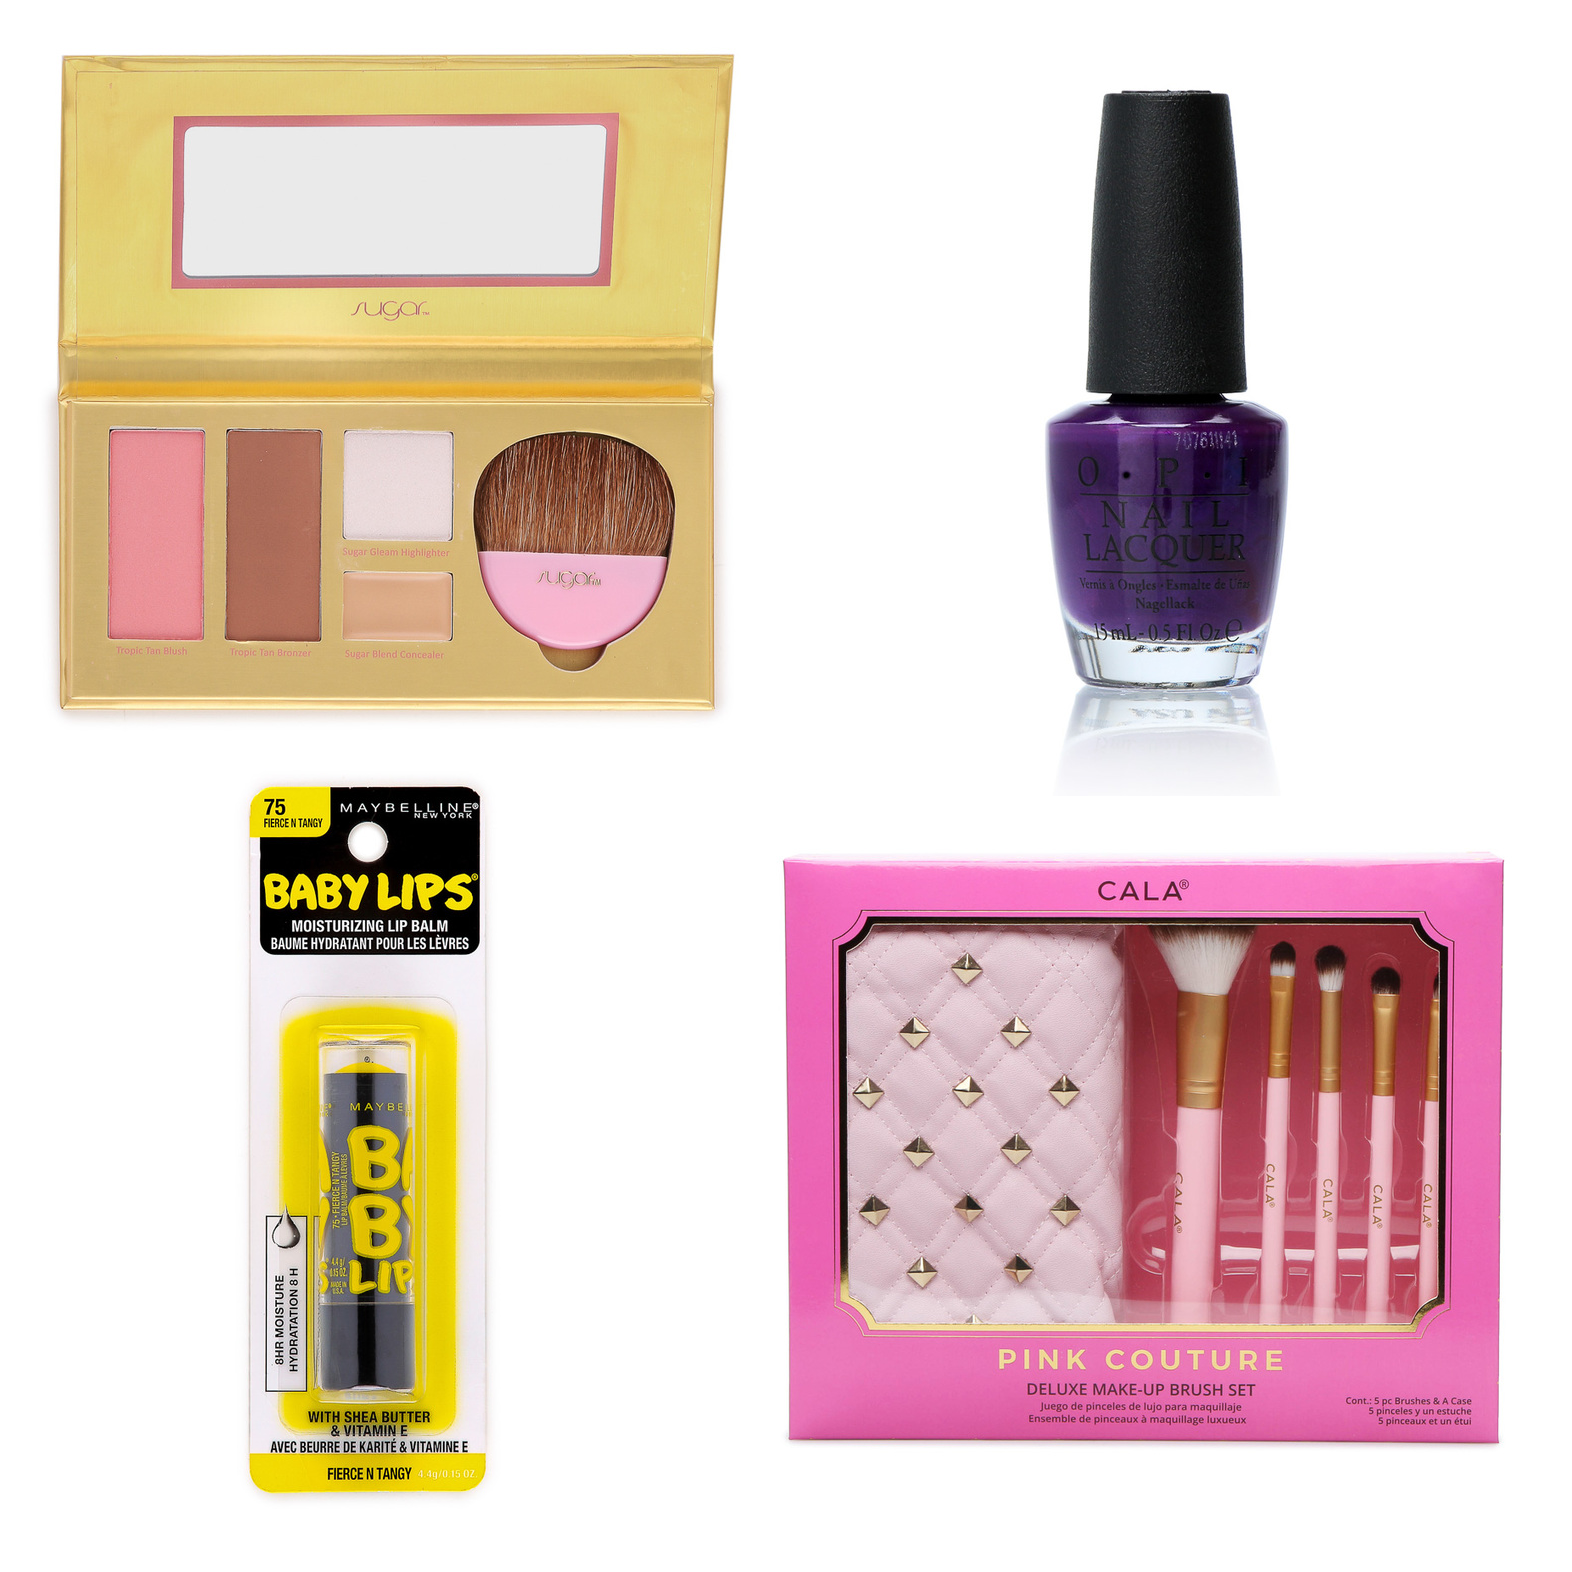 Name Brand Beauty Items Sale on Hollar! Prices Start at $1.00! (Perfect Stocking Stuffers)